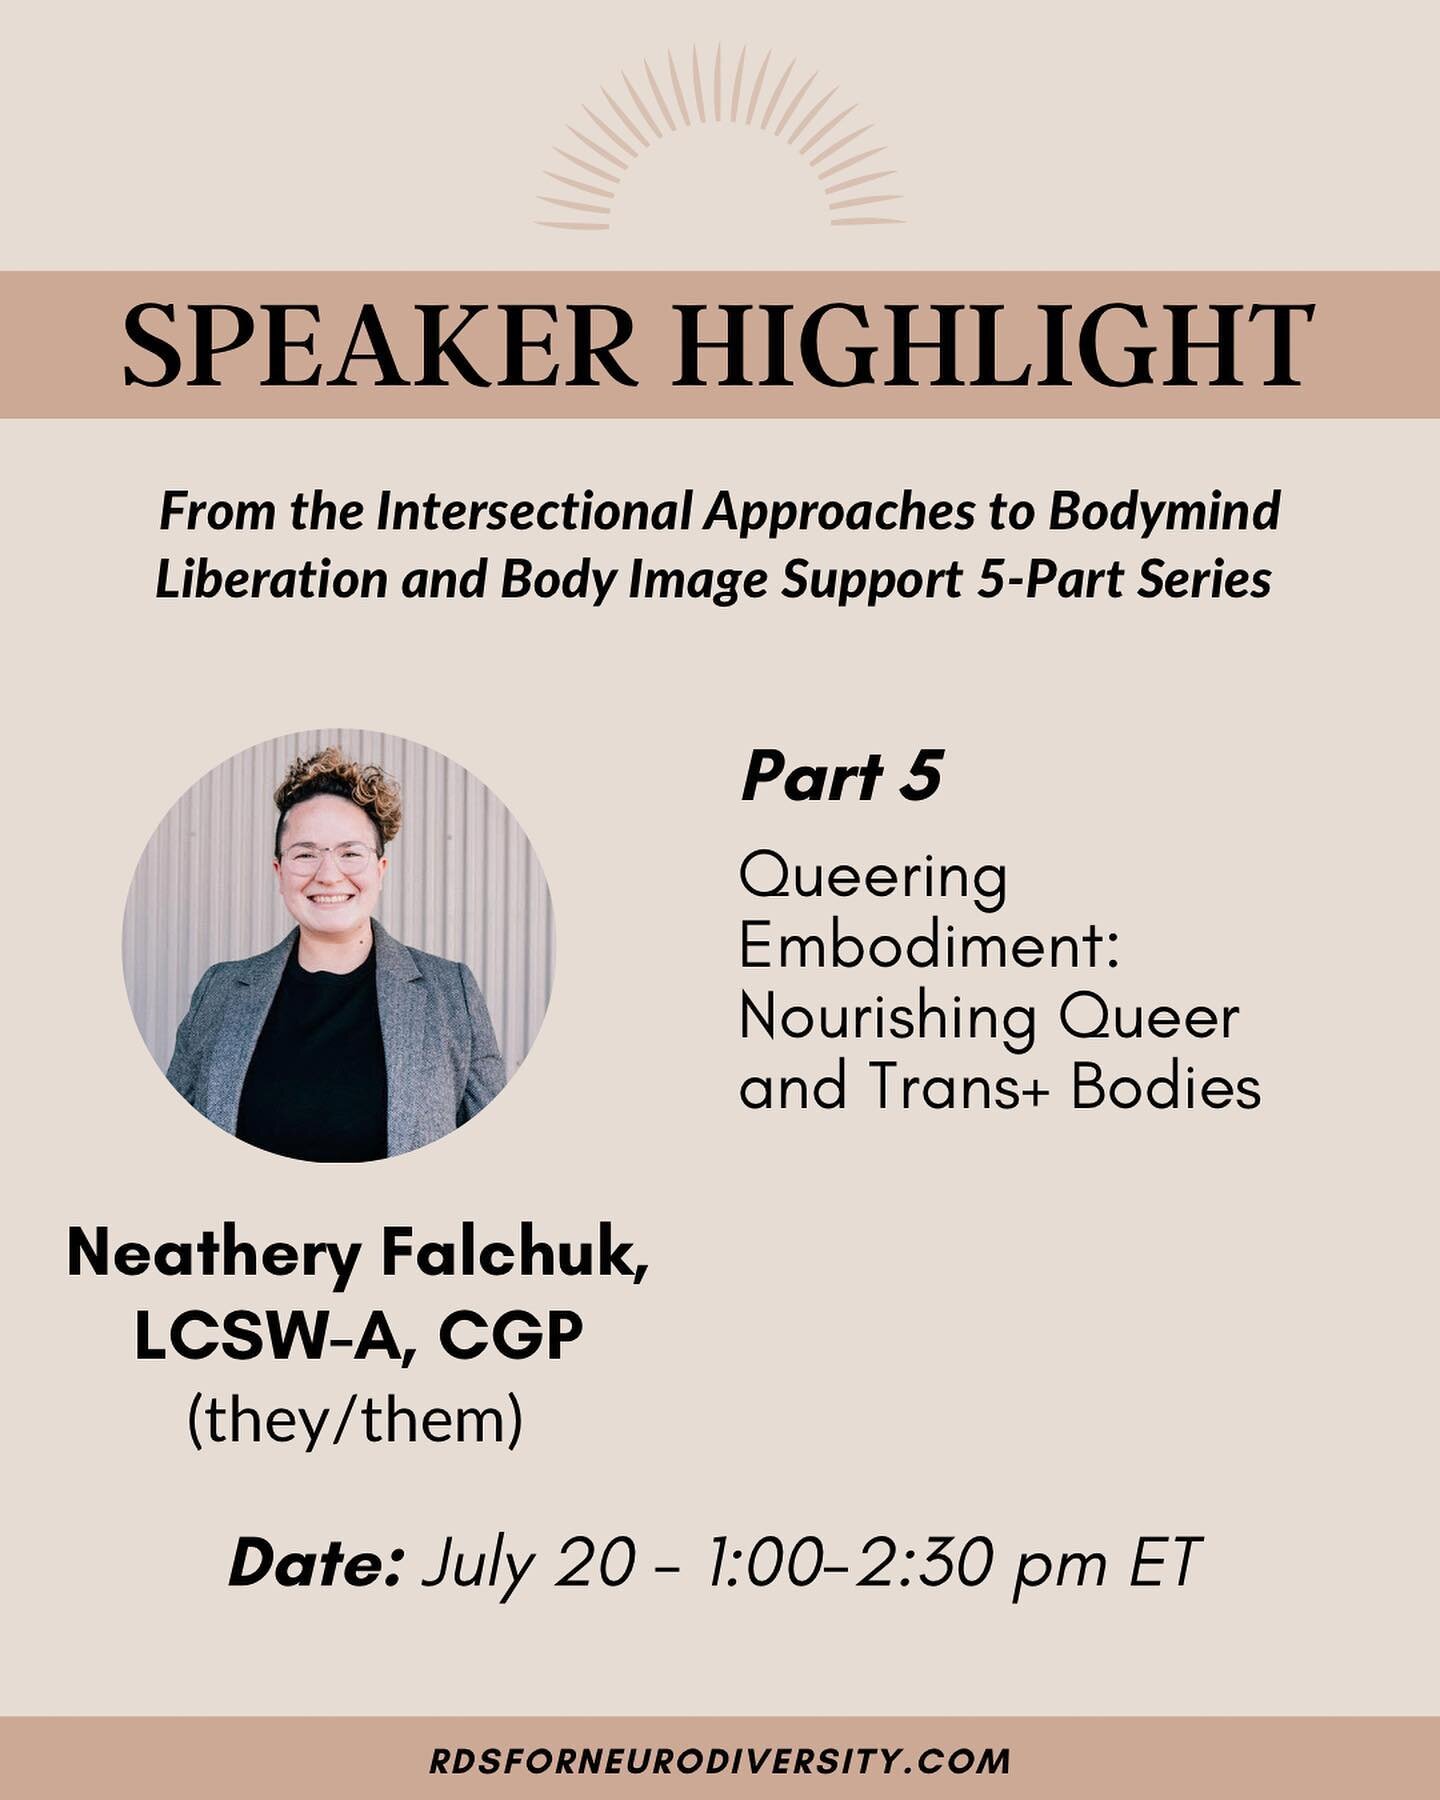 Part 5: Queering Embodiment: Nourishing Queer and Trans+ Bodies⁣
⁣
Presenter: Neathery Falchuk, LCSW-A, CGP (they/them). @ampleandrooted 
⁣
Join Neathery for an in-depth discussion navigating the nuance of queer embodiment, nourishment, and bodymind 